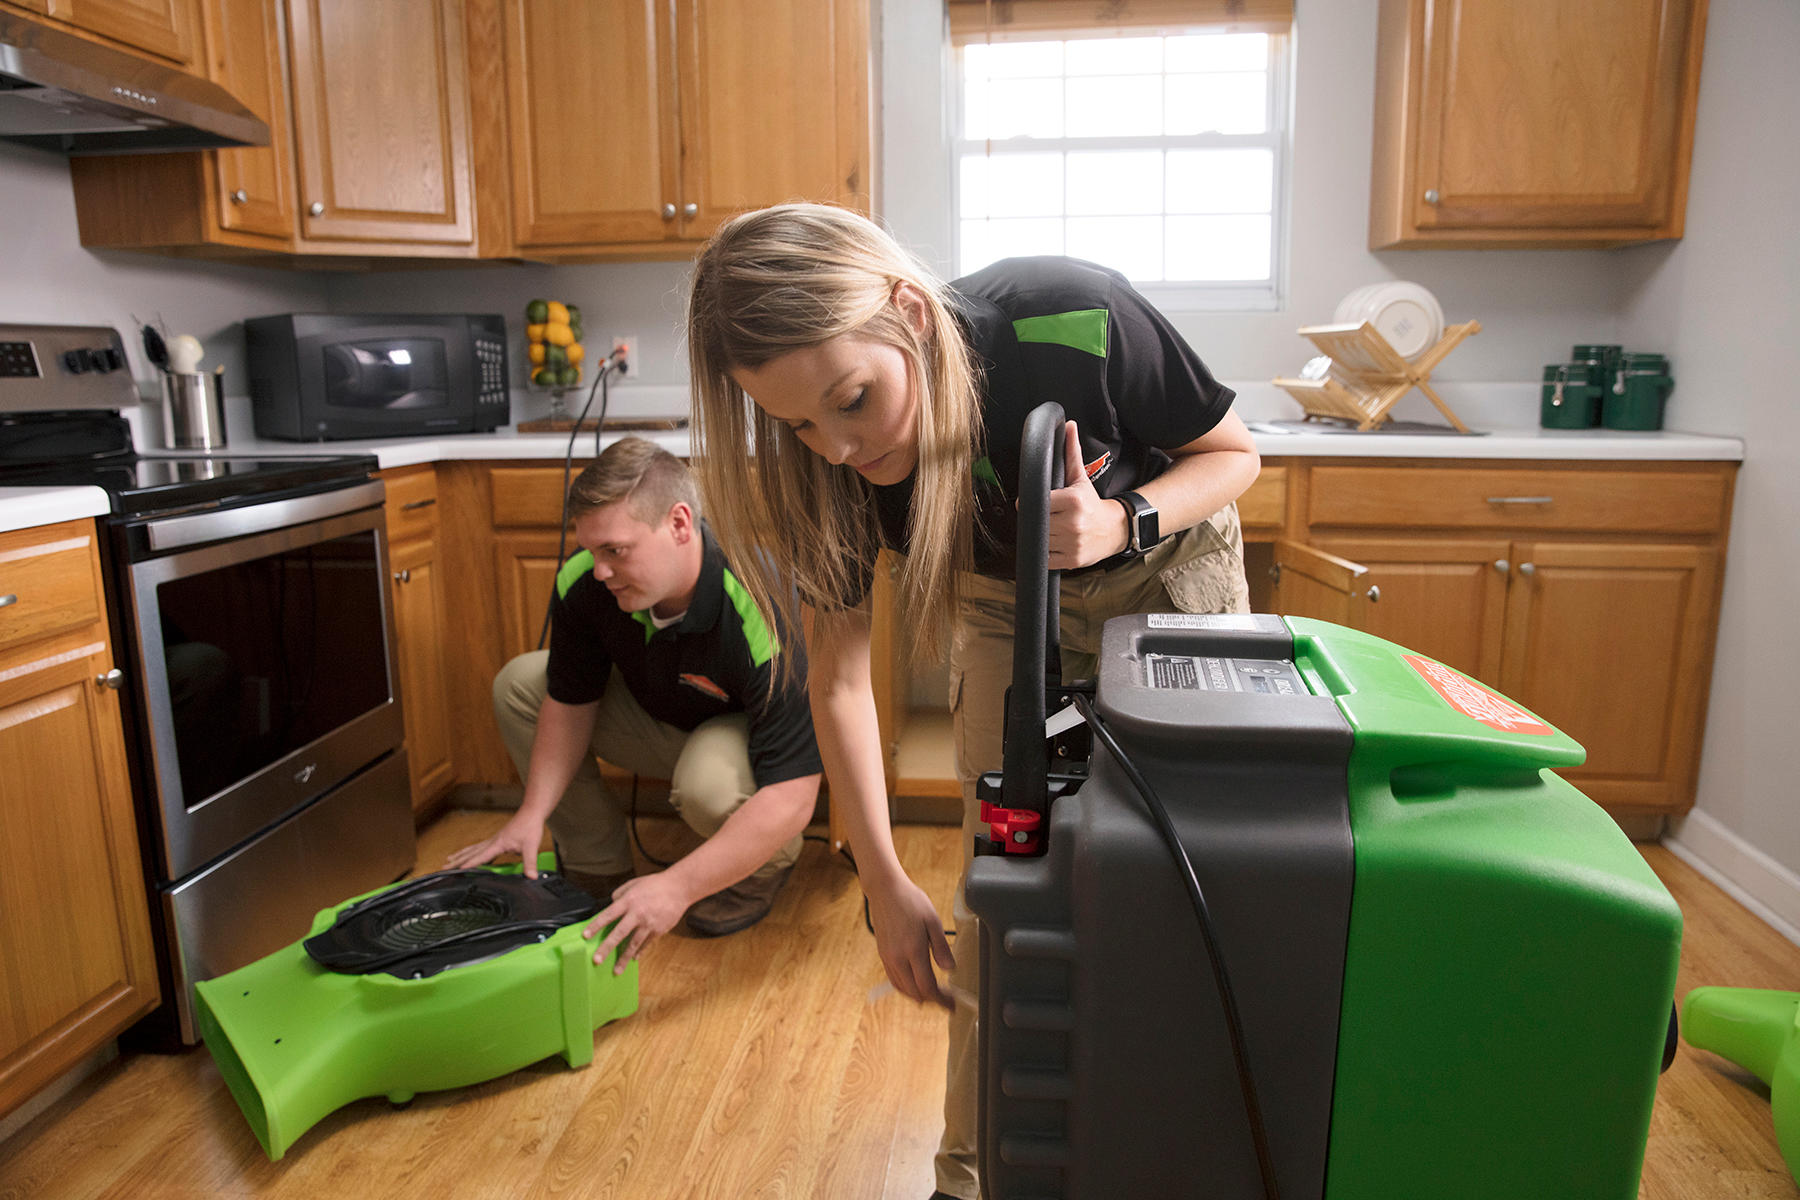 When water damage happens to your home, SERVPRO will respond quickly to begin the process of water removal, damage repair, and the water damage restoration process.